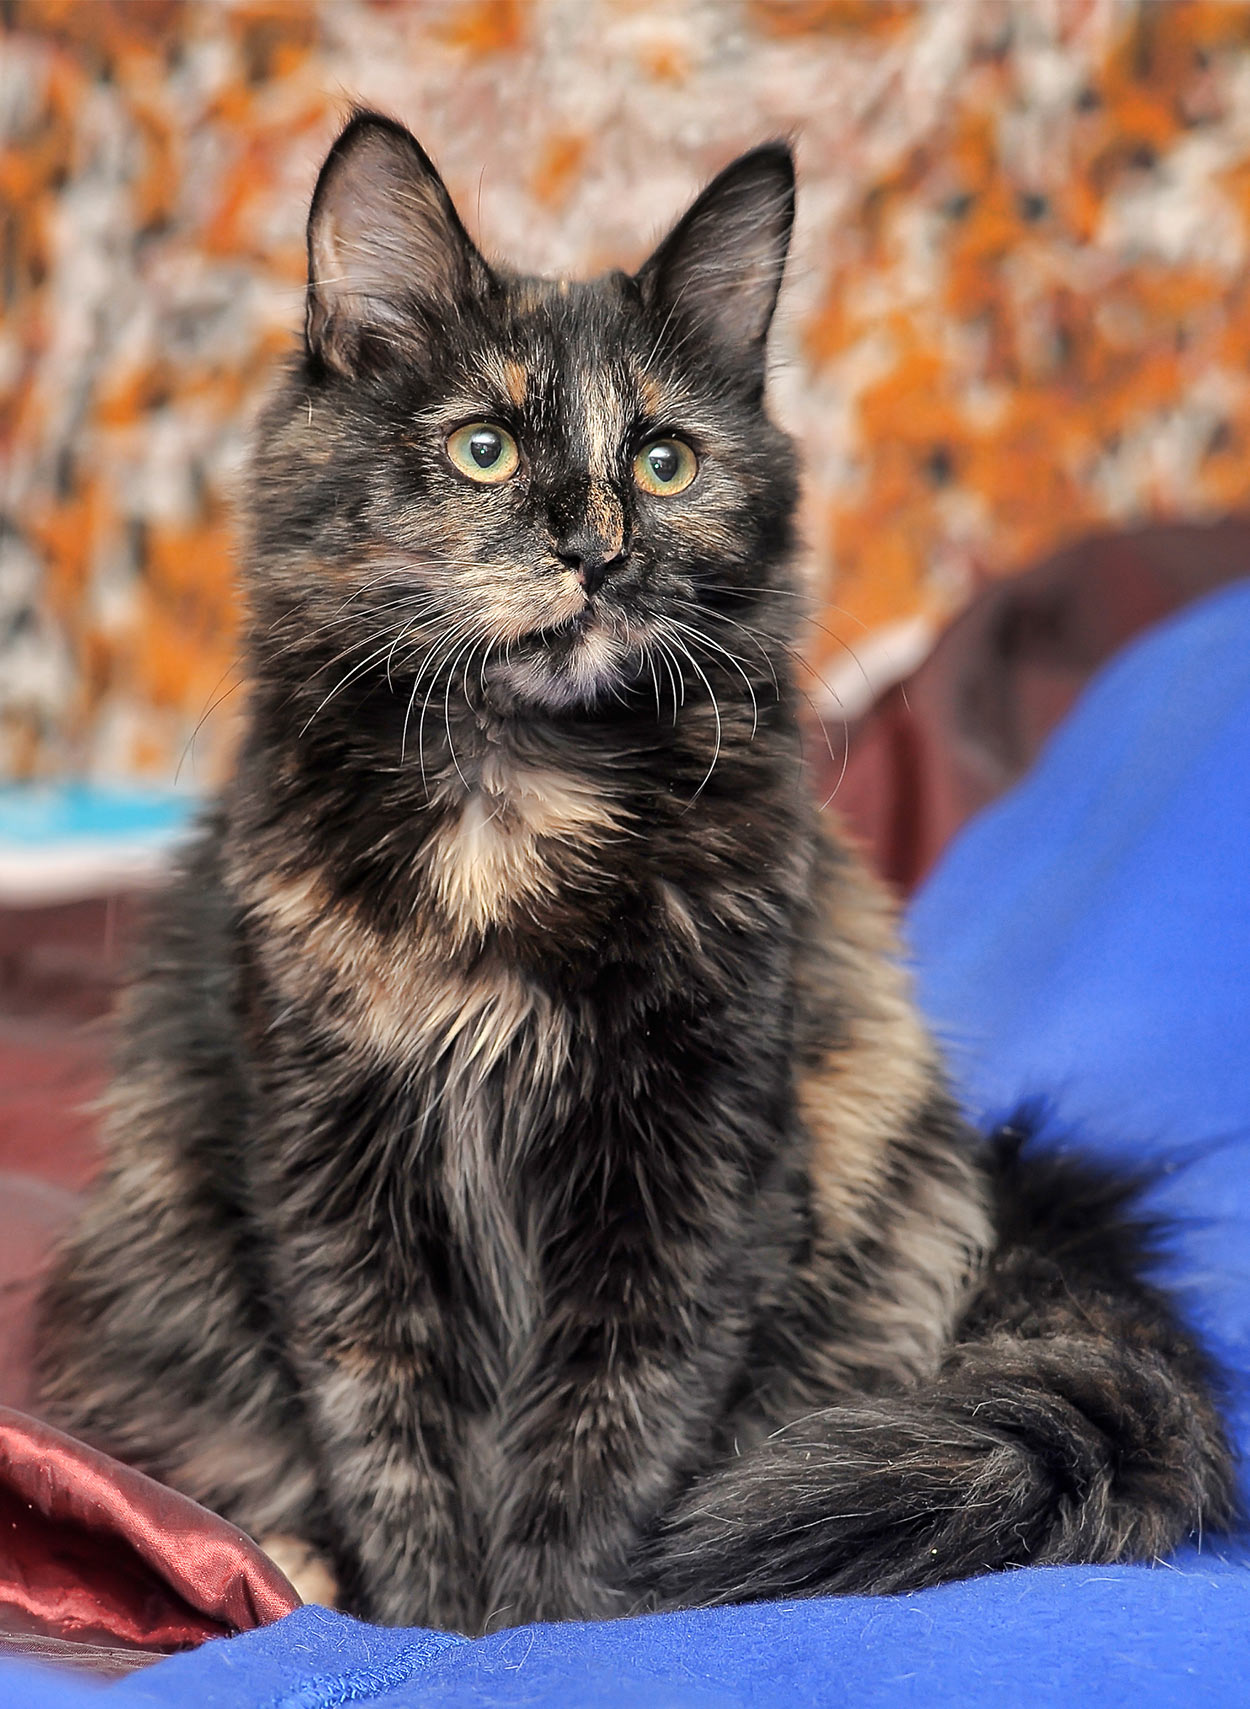 Why are tortoiseshell cats so expensive?